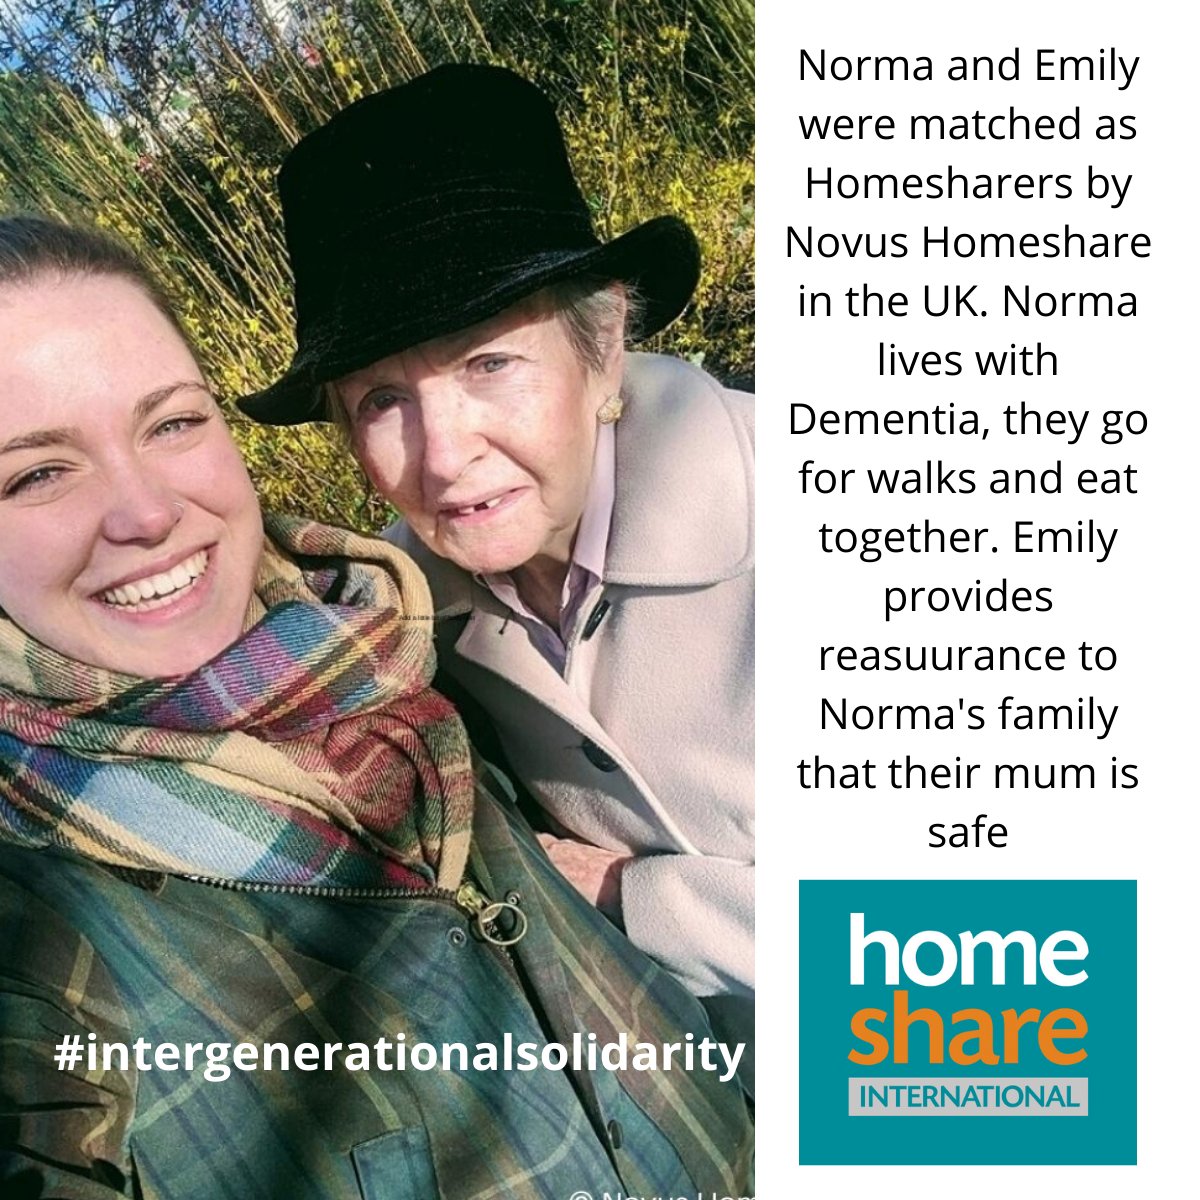 We are sharing some pictures and stories of our Homeshare matches to show how #Homeshare is supporting #intergenerationalsolidarity today